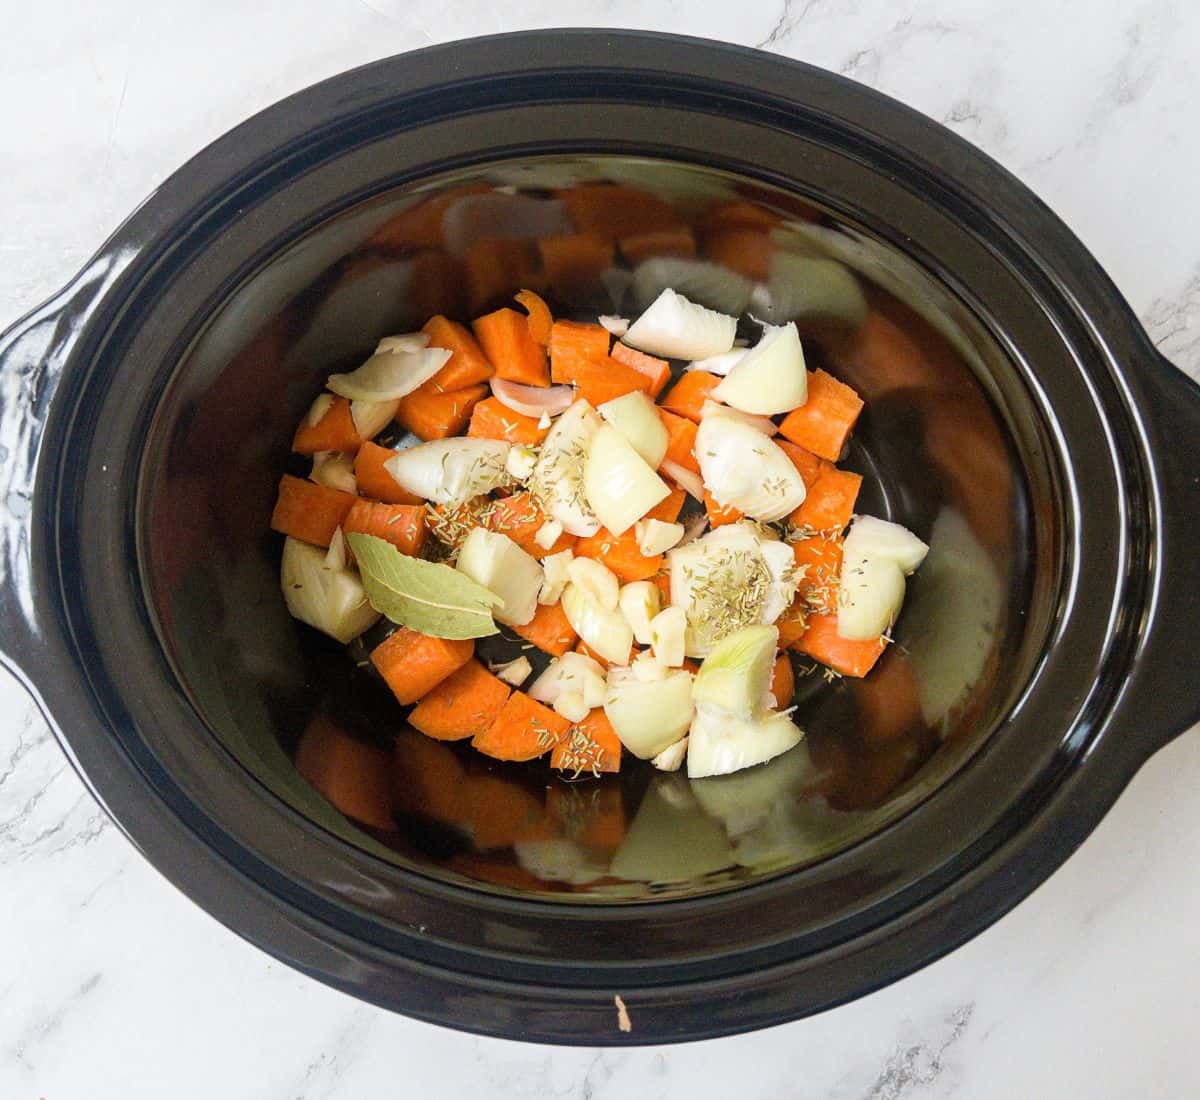 Carrots, onion, rosemary & garlic in a slow cooker.